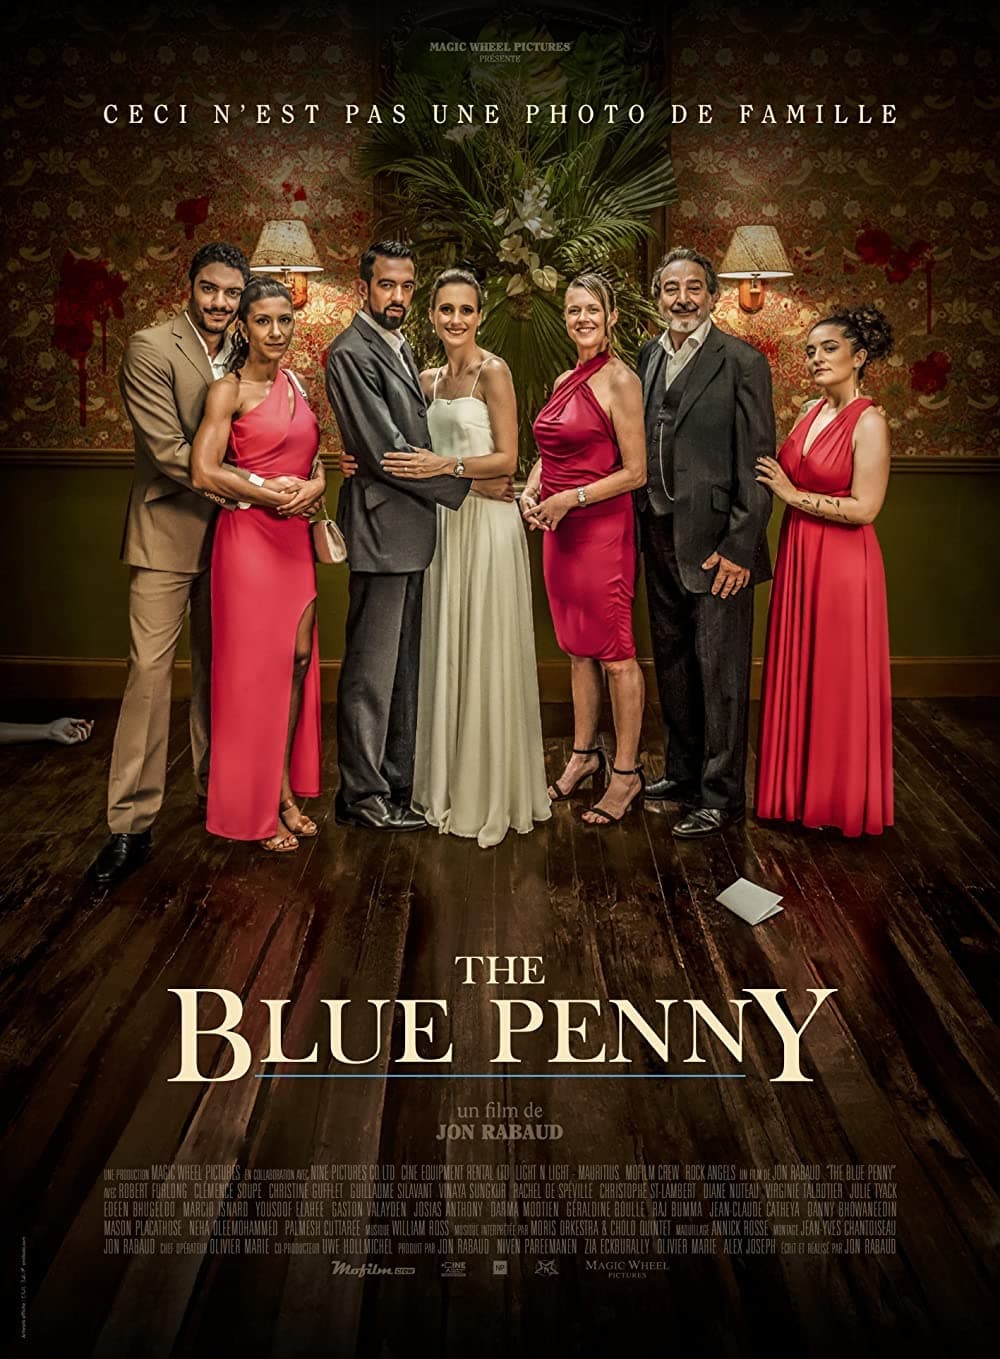 The Blue Penny